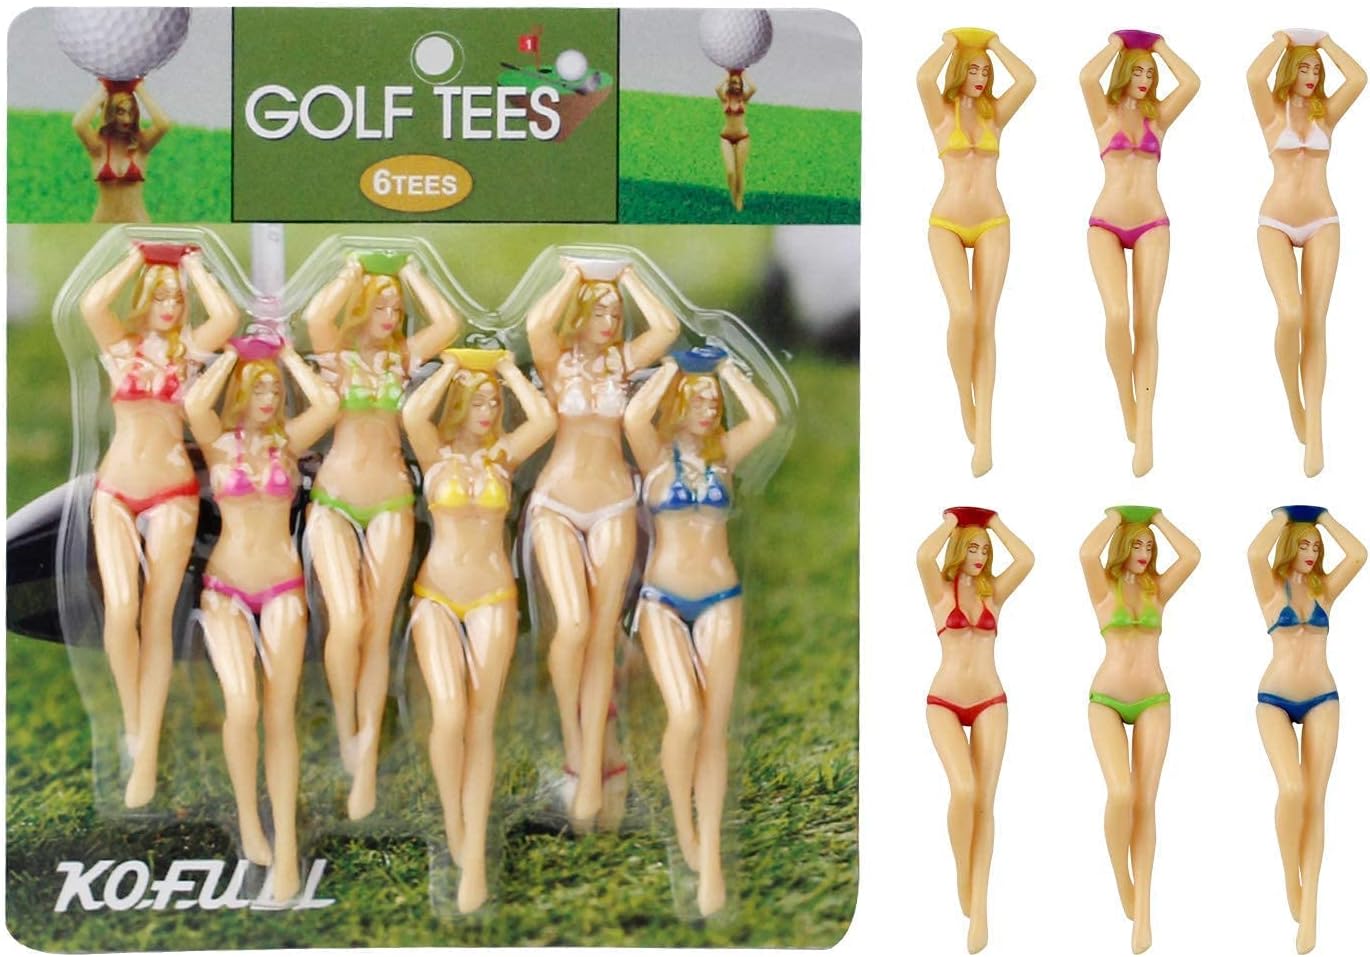 Kofull 6 Pieces Golf Tee Funny Tees Golf as a Gift for Golf Mat Mixed Golf Tees Golf Accessories